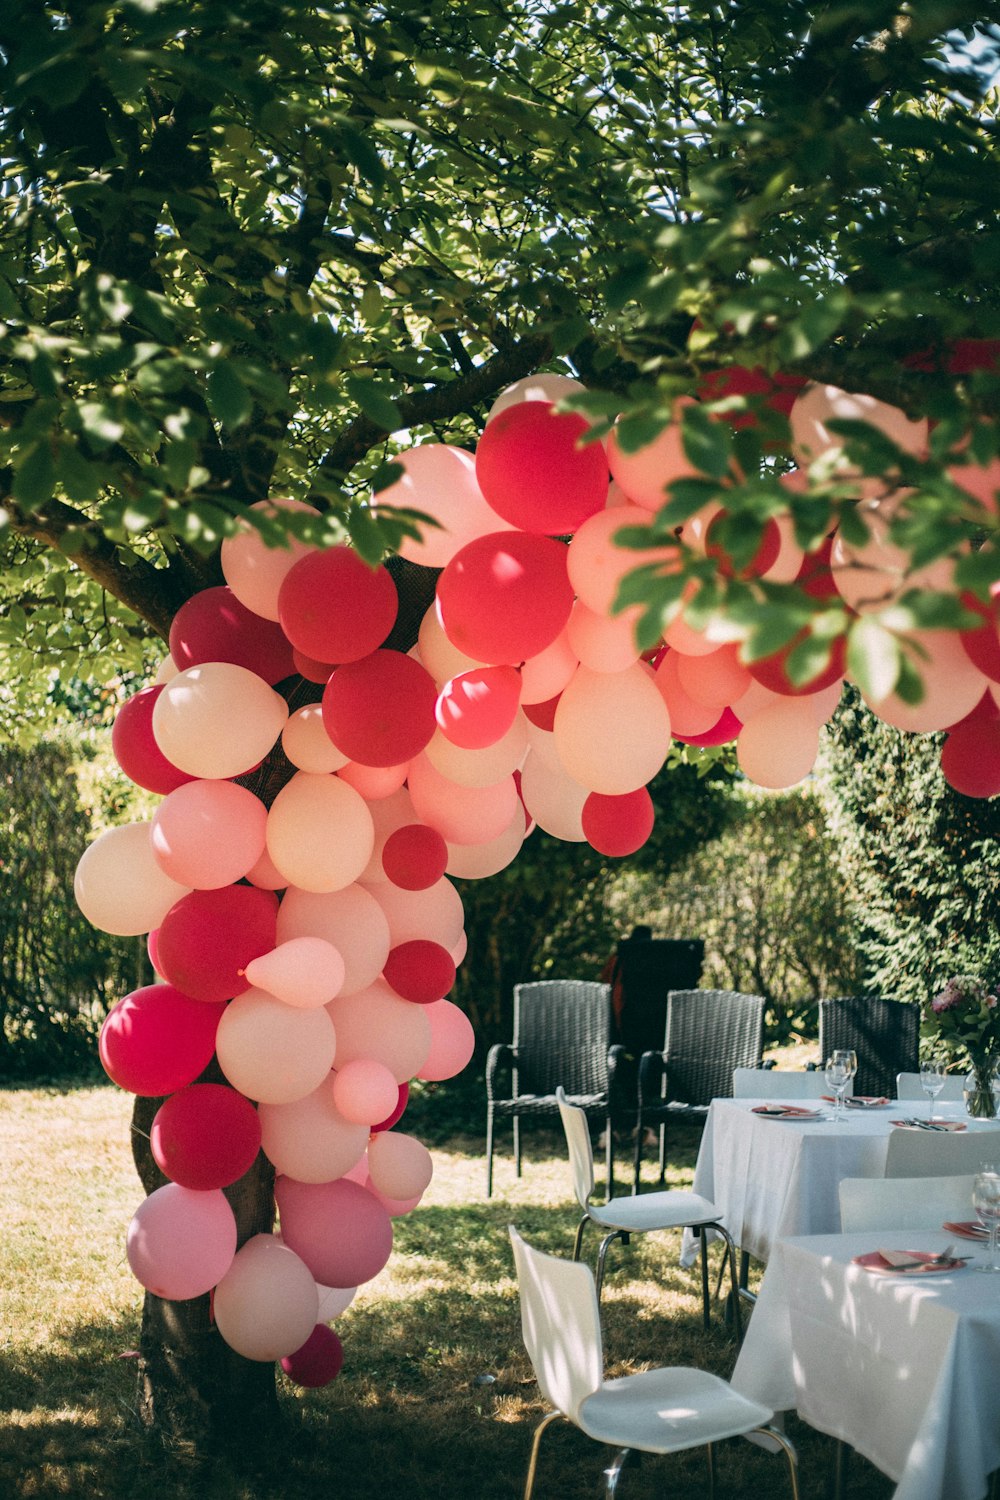 pink and red balloons near green trees during daytime